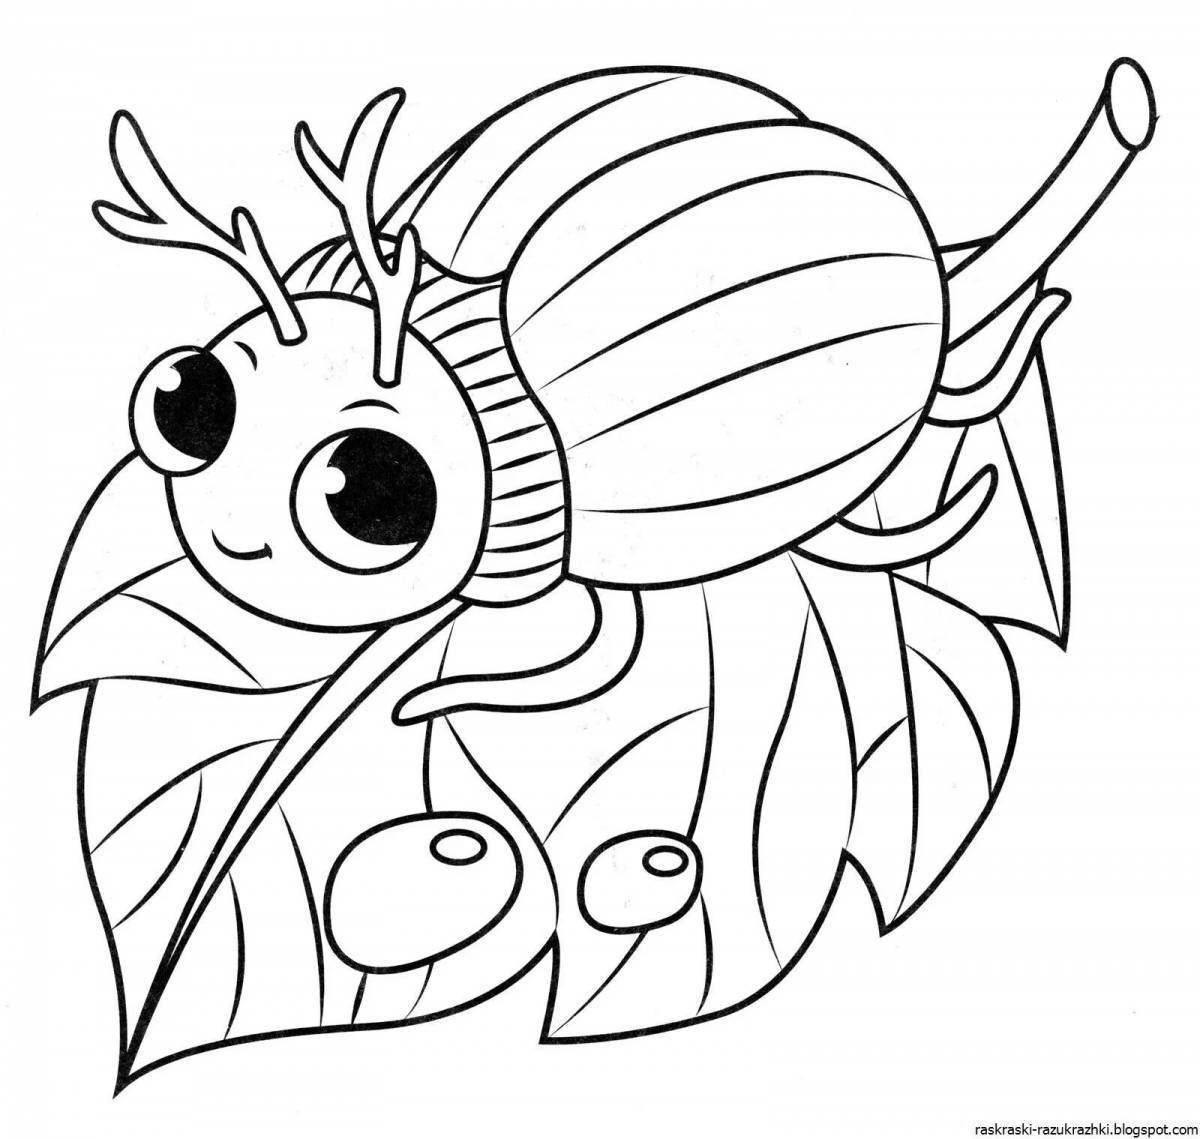 Adorable beetle coloring pages for 3-4 year olds